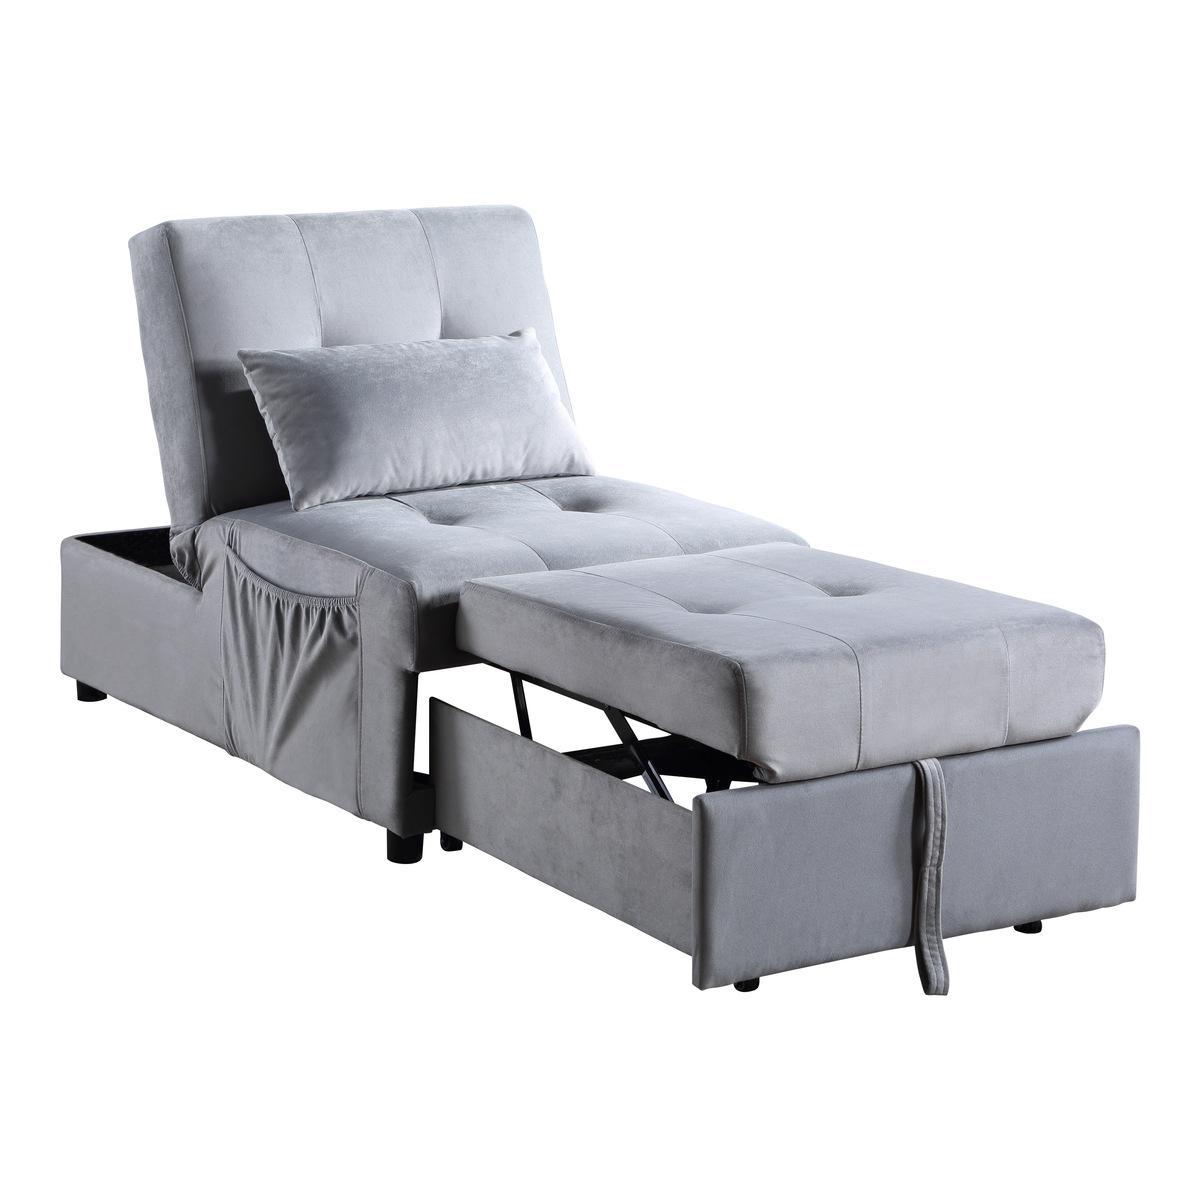 Joyce Media Chair with Pull Out Pop Up ottoman and storage in Gray Velvet type Fabric